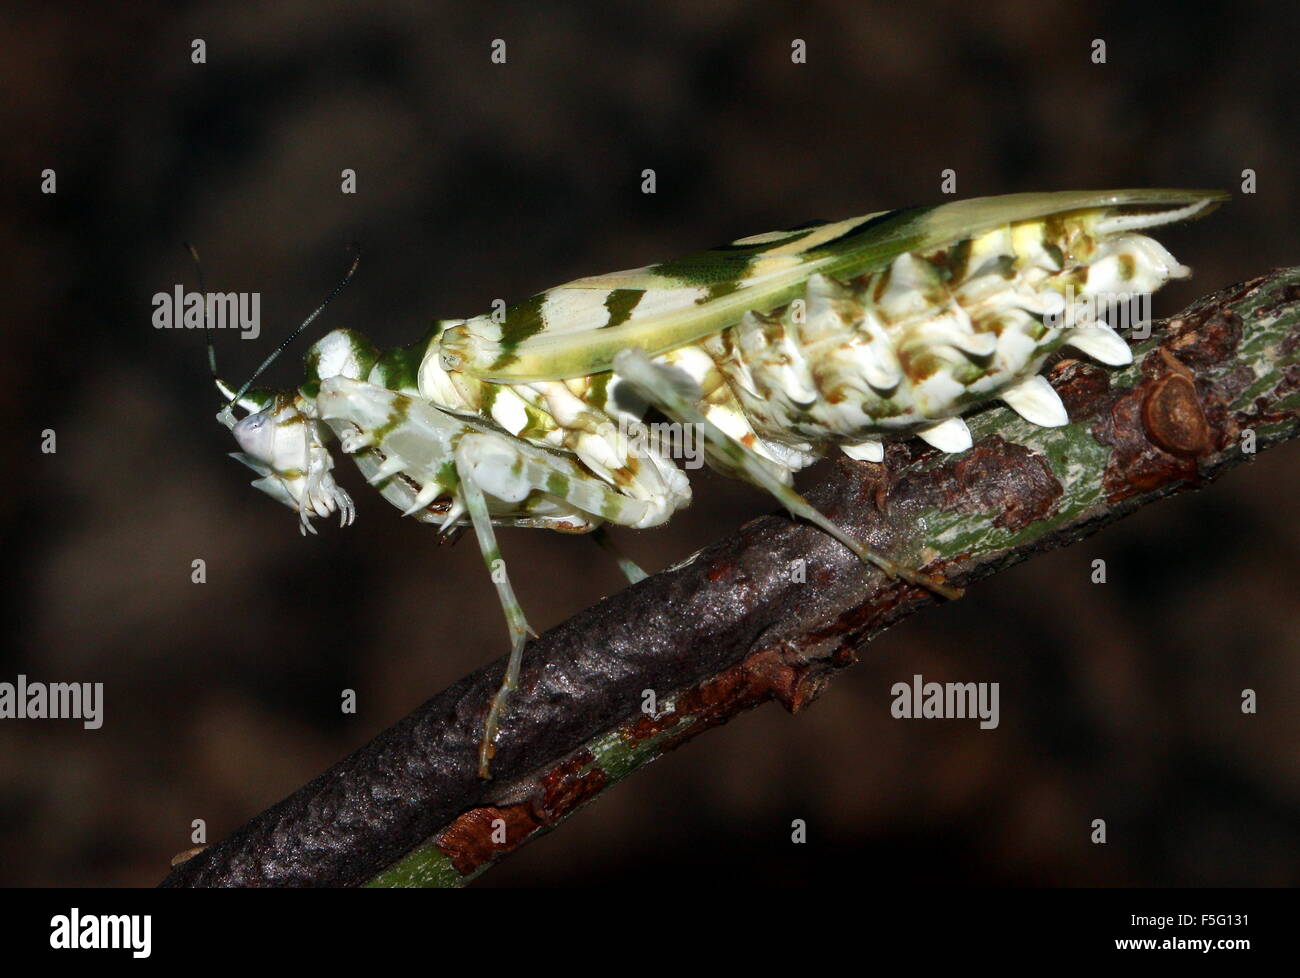 East African Spiny flower mantis (Pseudocreobotra wahlbergi) seen in profile Stock Photo